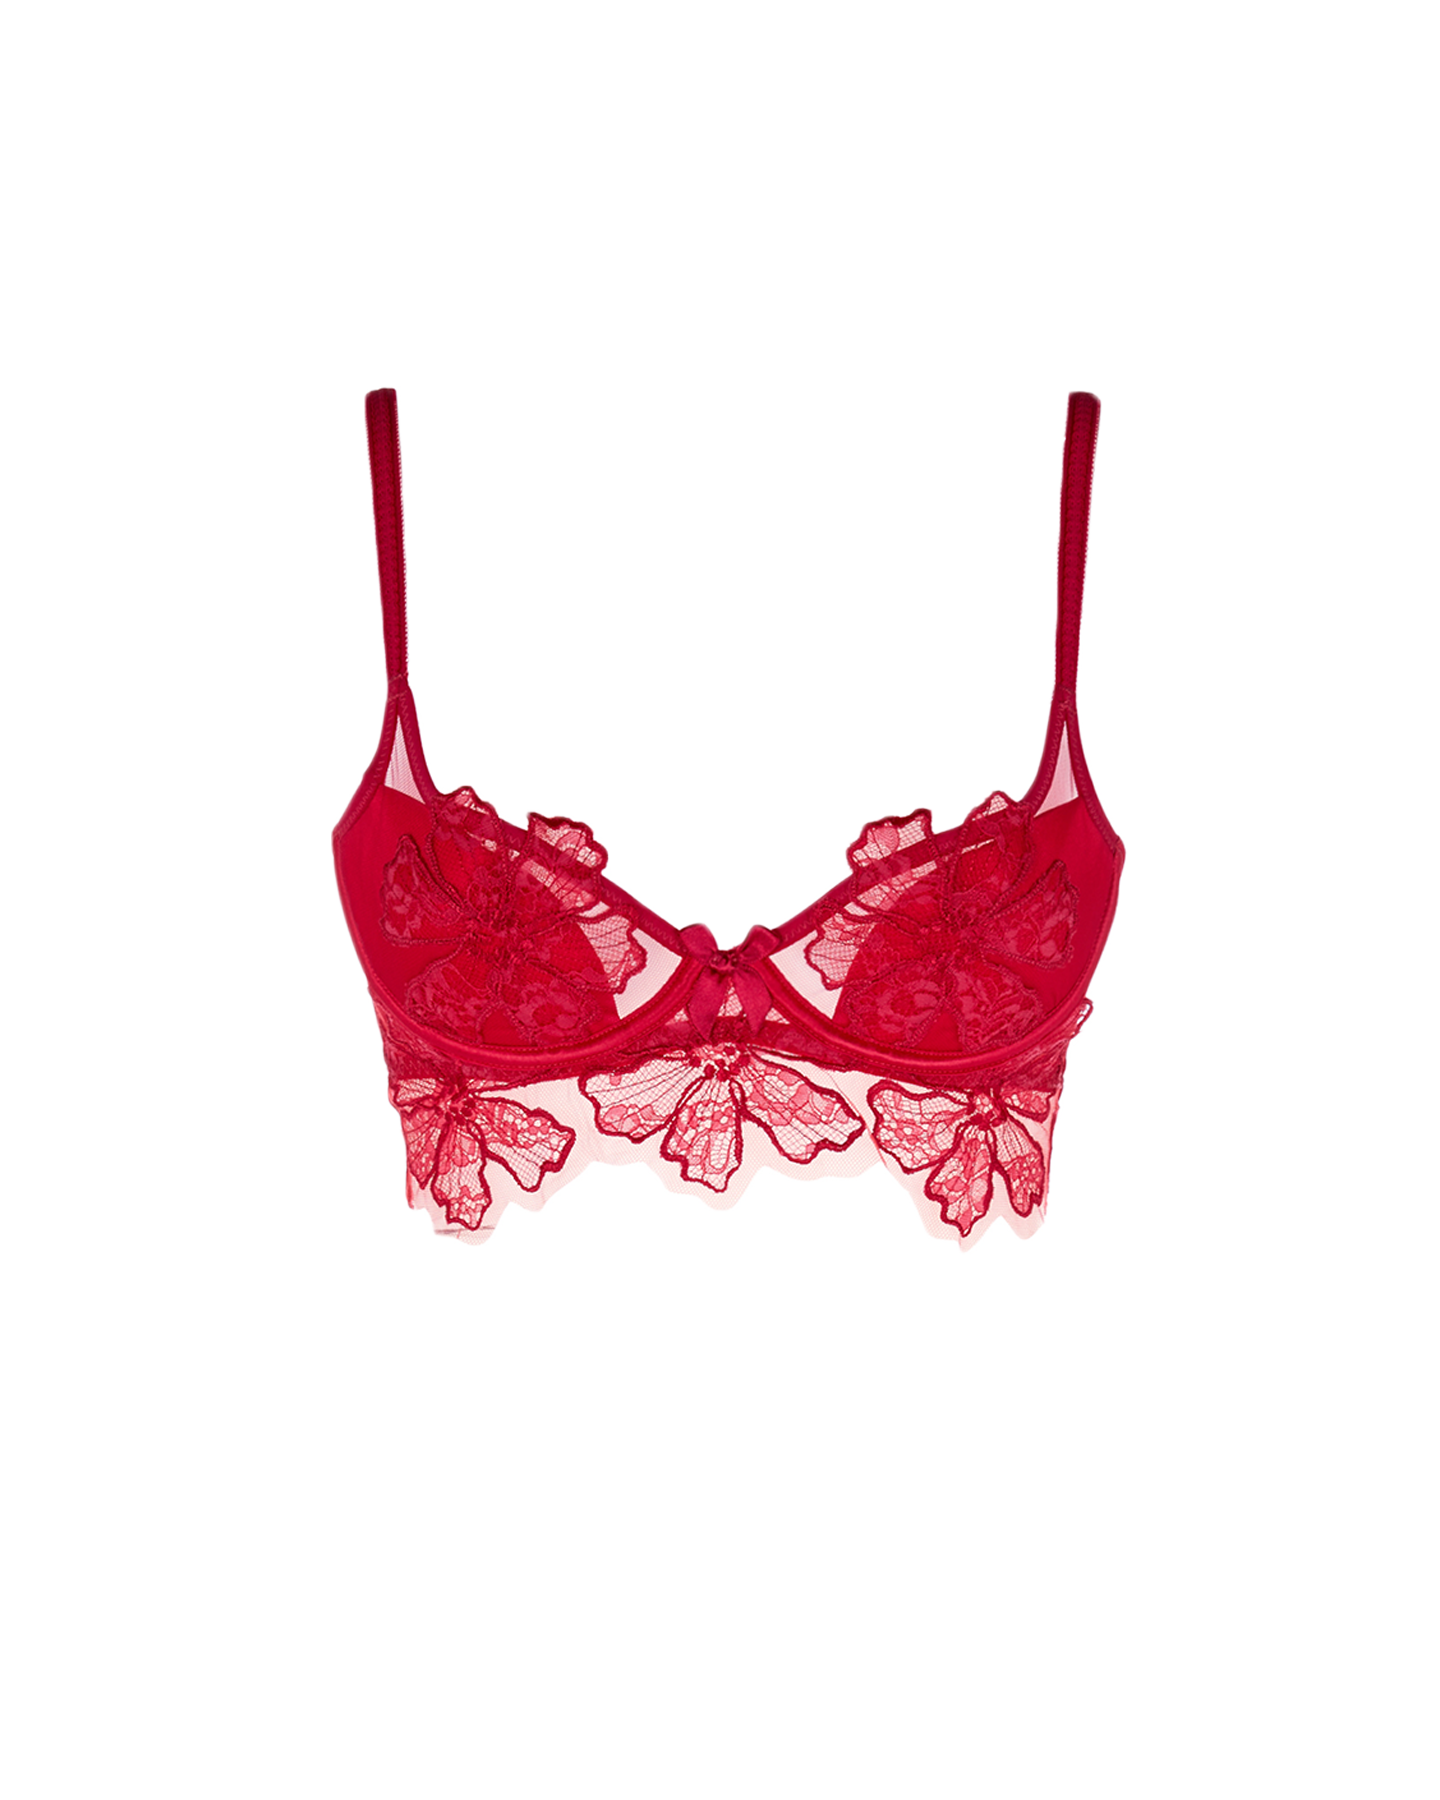 Seraphina Bra in Red | By Agent Provocateur